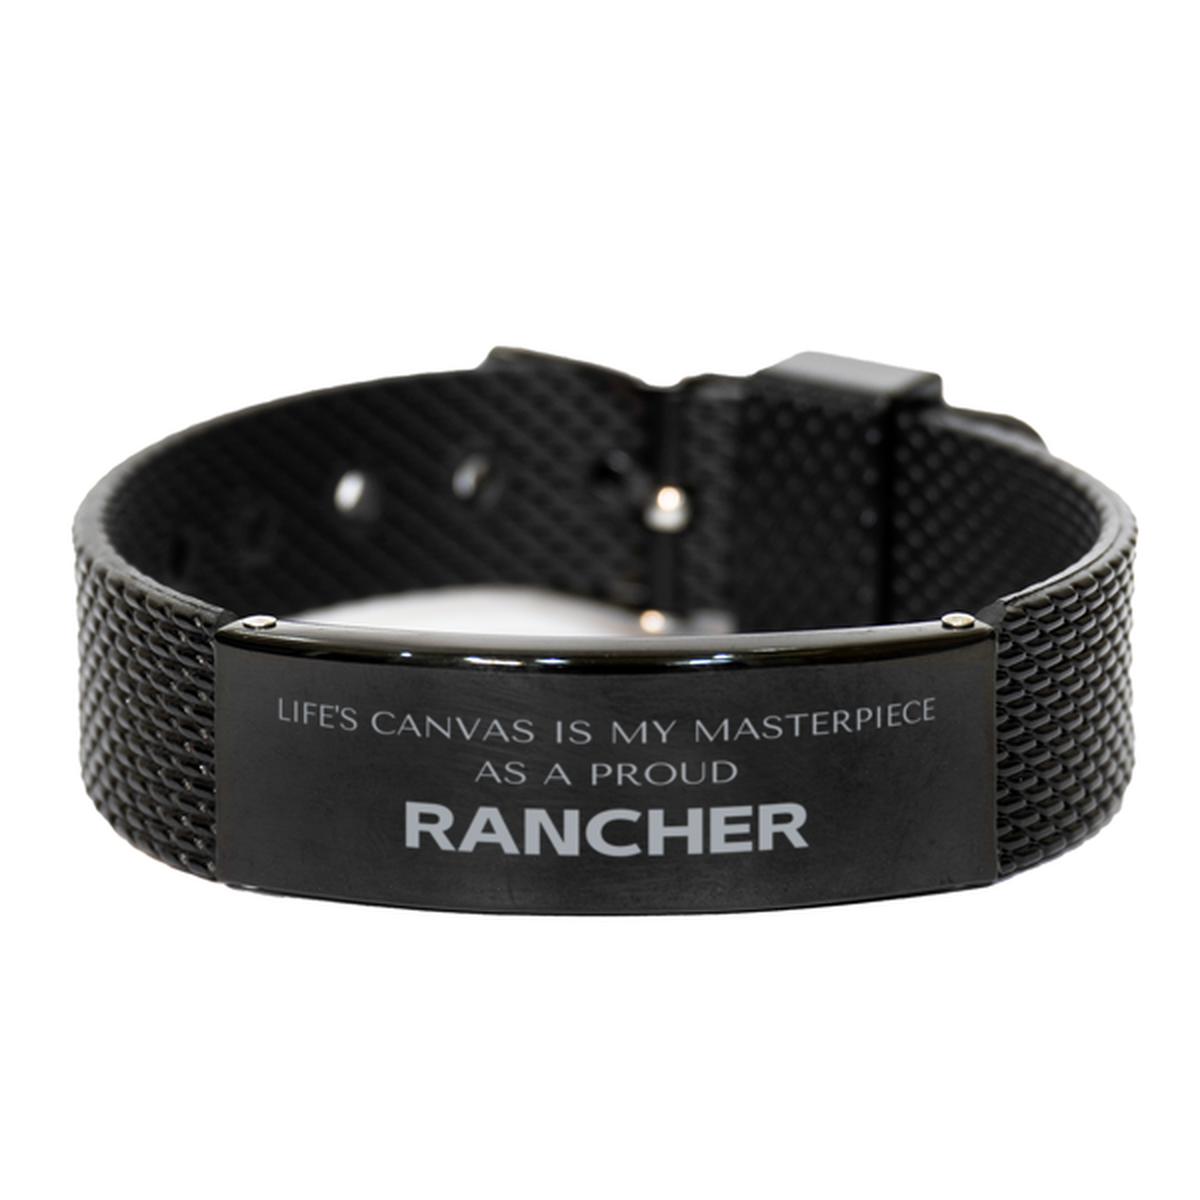 Proud Rancher Gifts, Life's canvas is my masterpiece, Epic Birthday Christmas Unique Black Shark Mesh Bracelet For Rancher, Coworkers, Men, Women, Friends